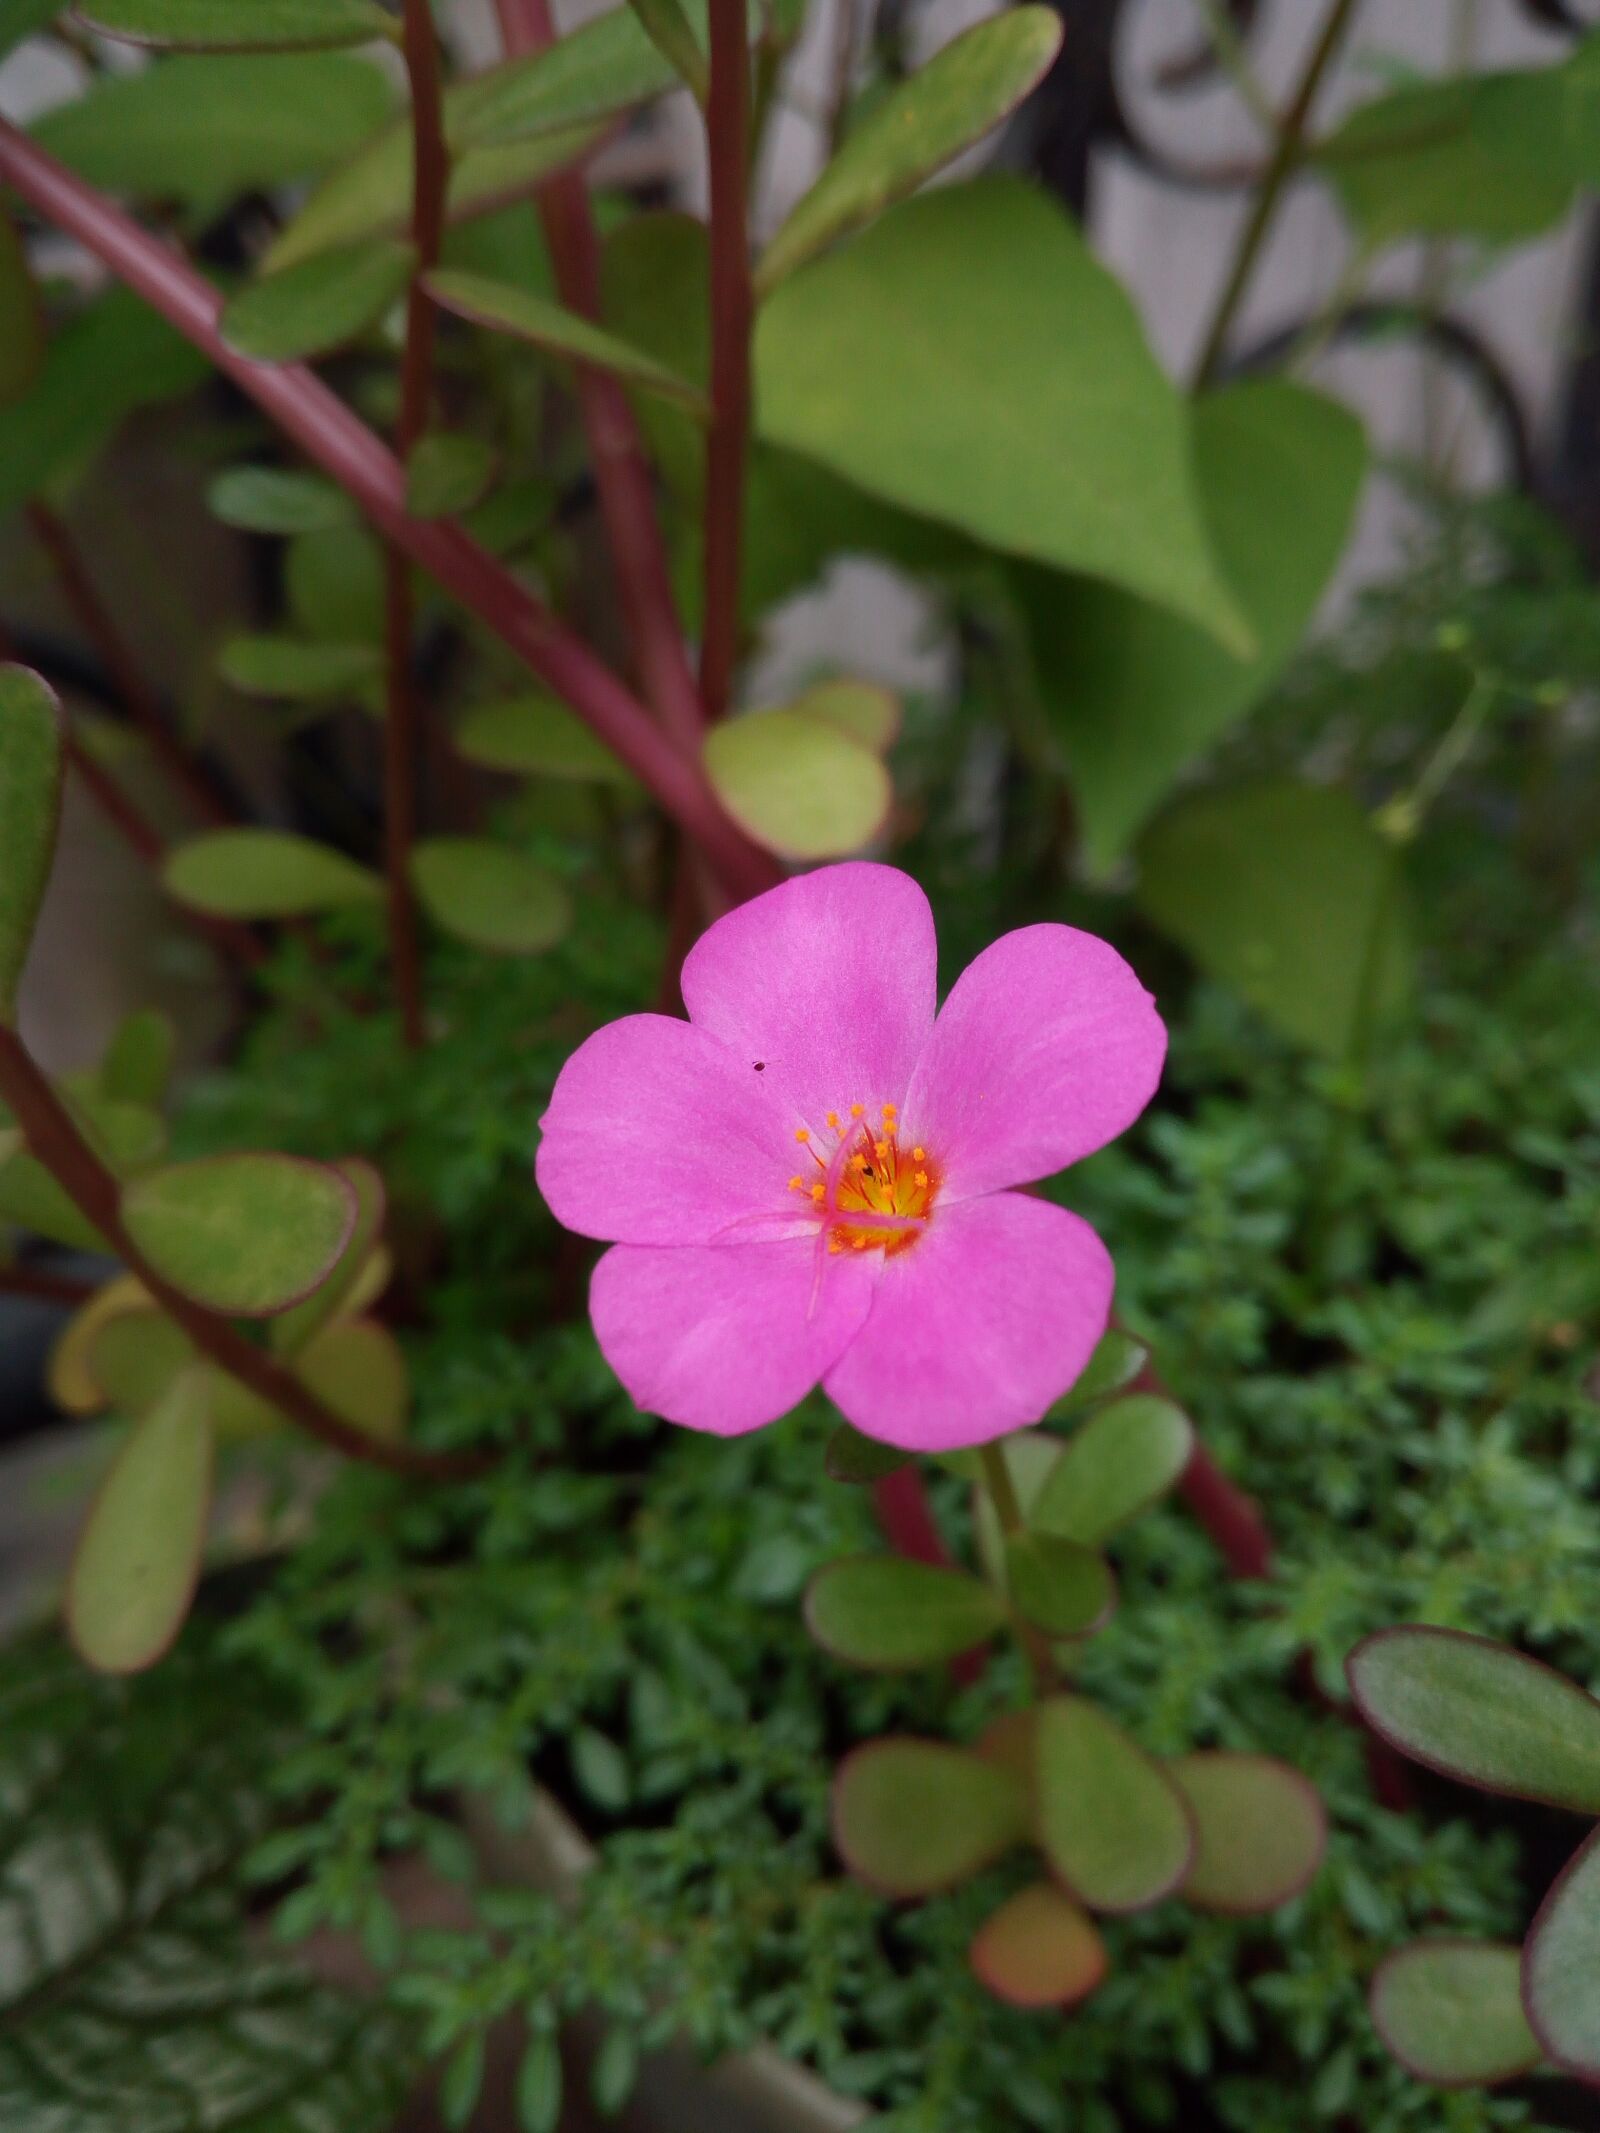 HUAWEI GR3 sample photo. Flower, plant, nature photography